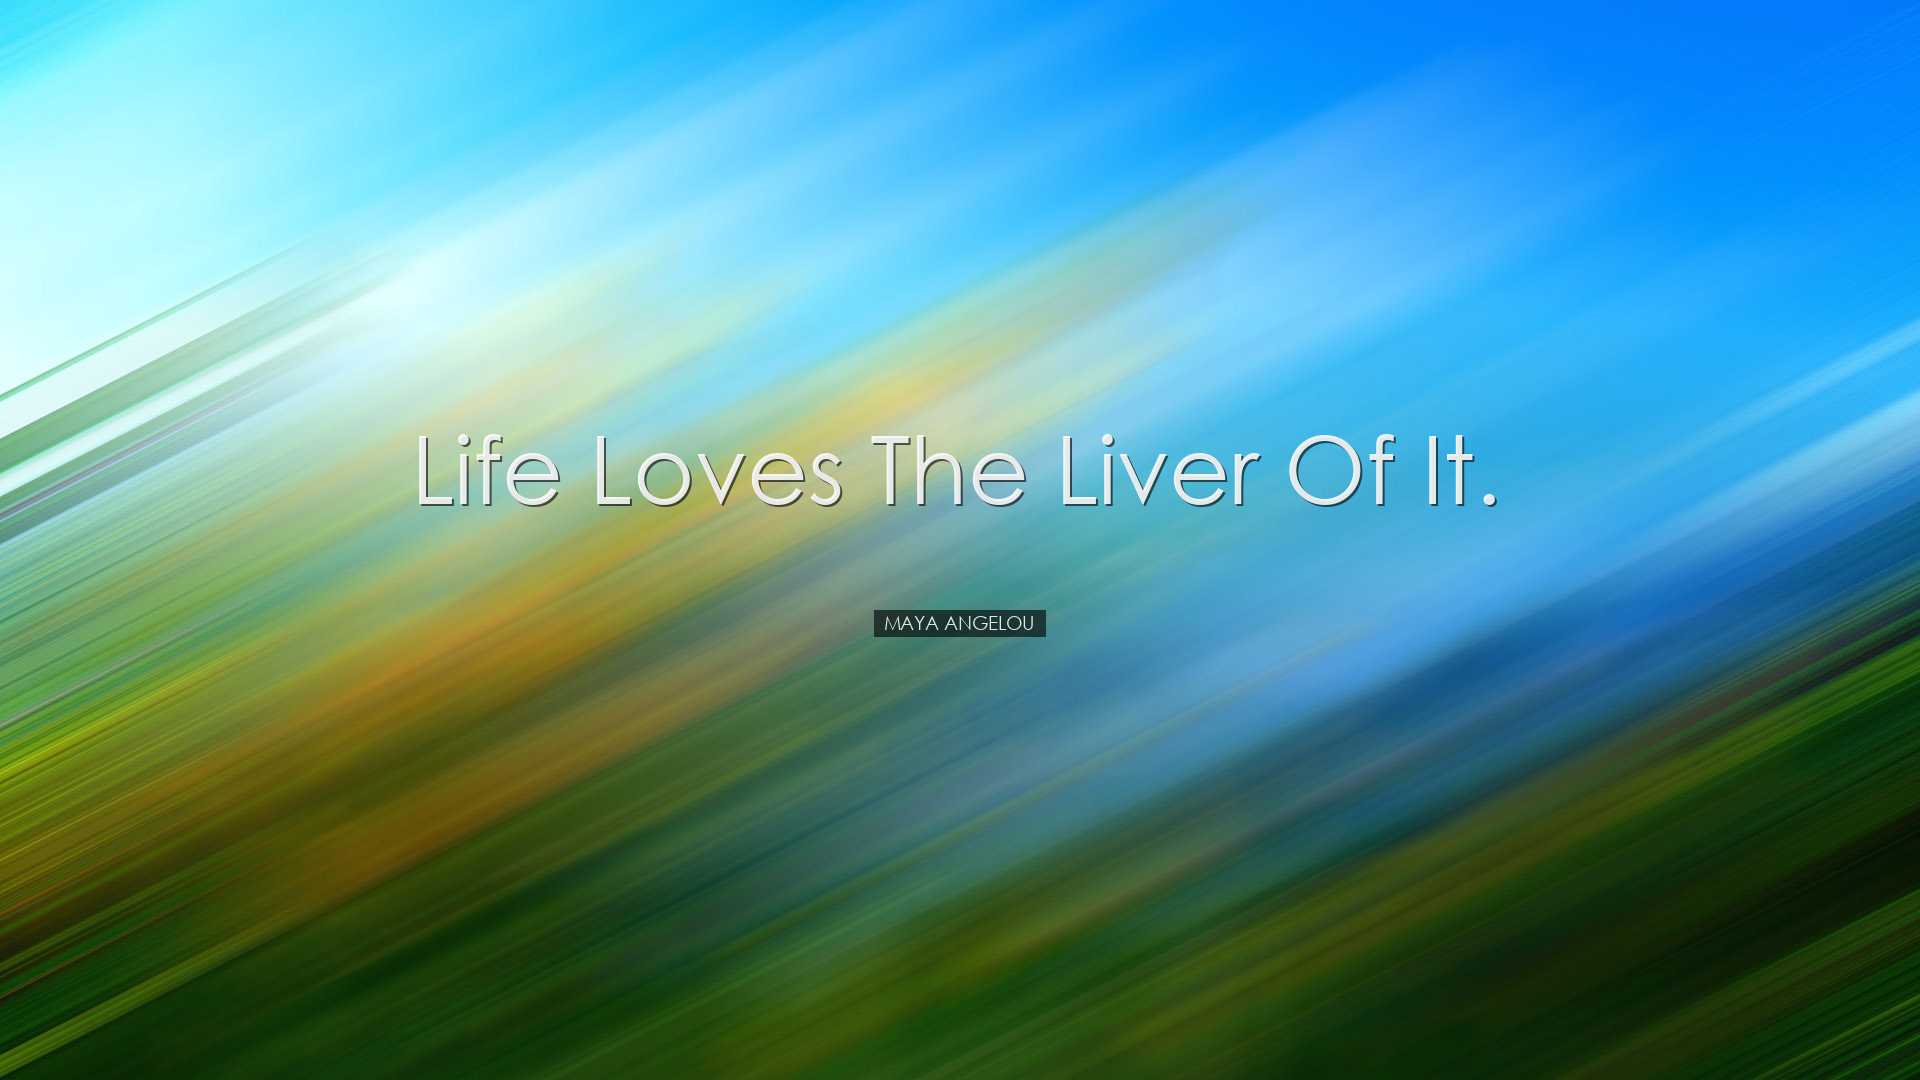 Life loves the liver of it. - Maya Angelou